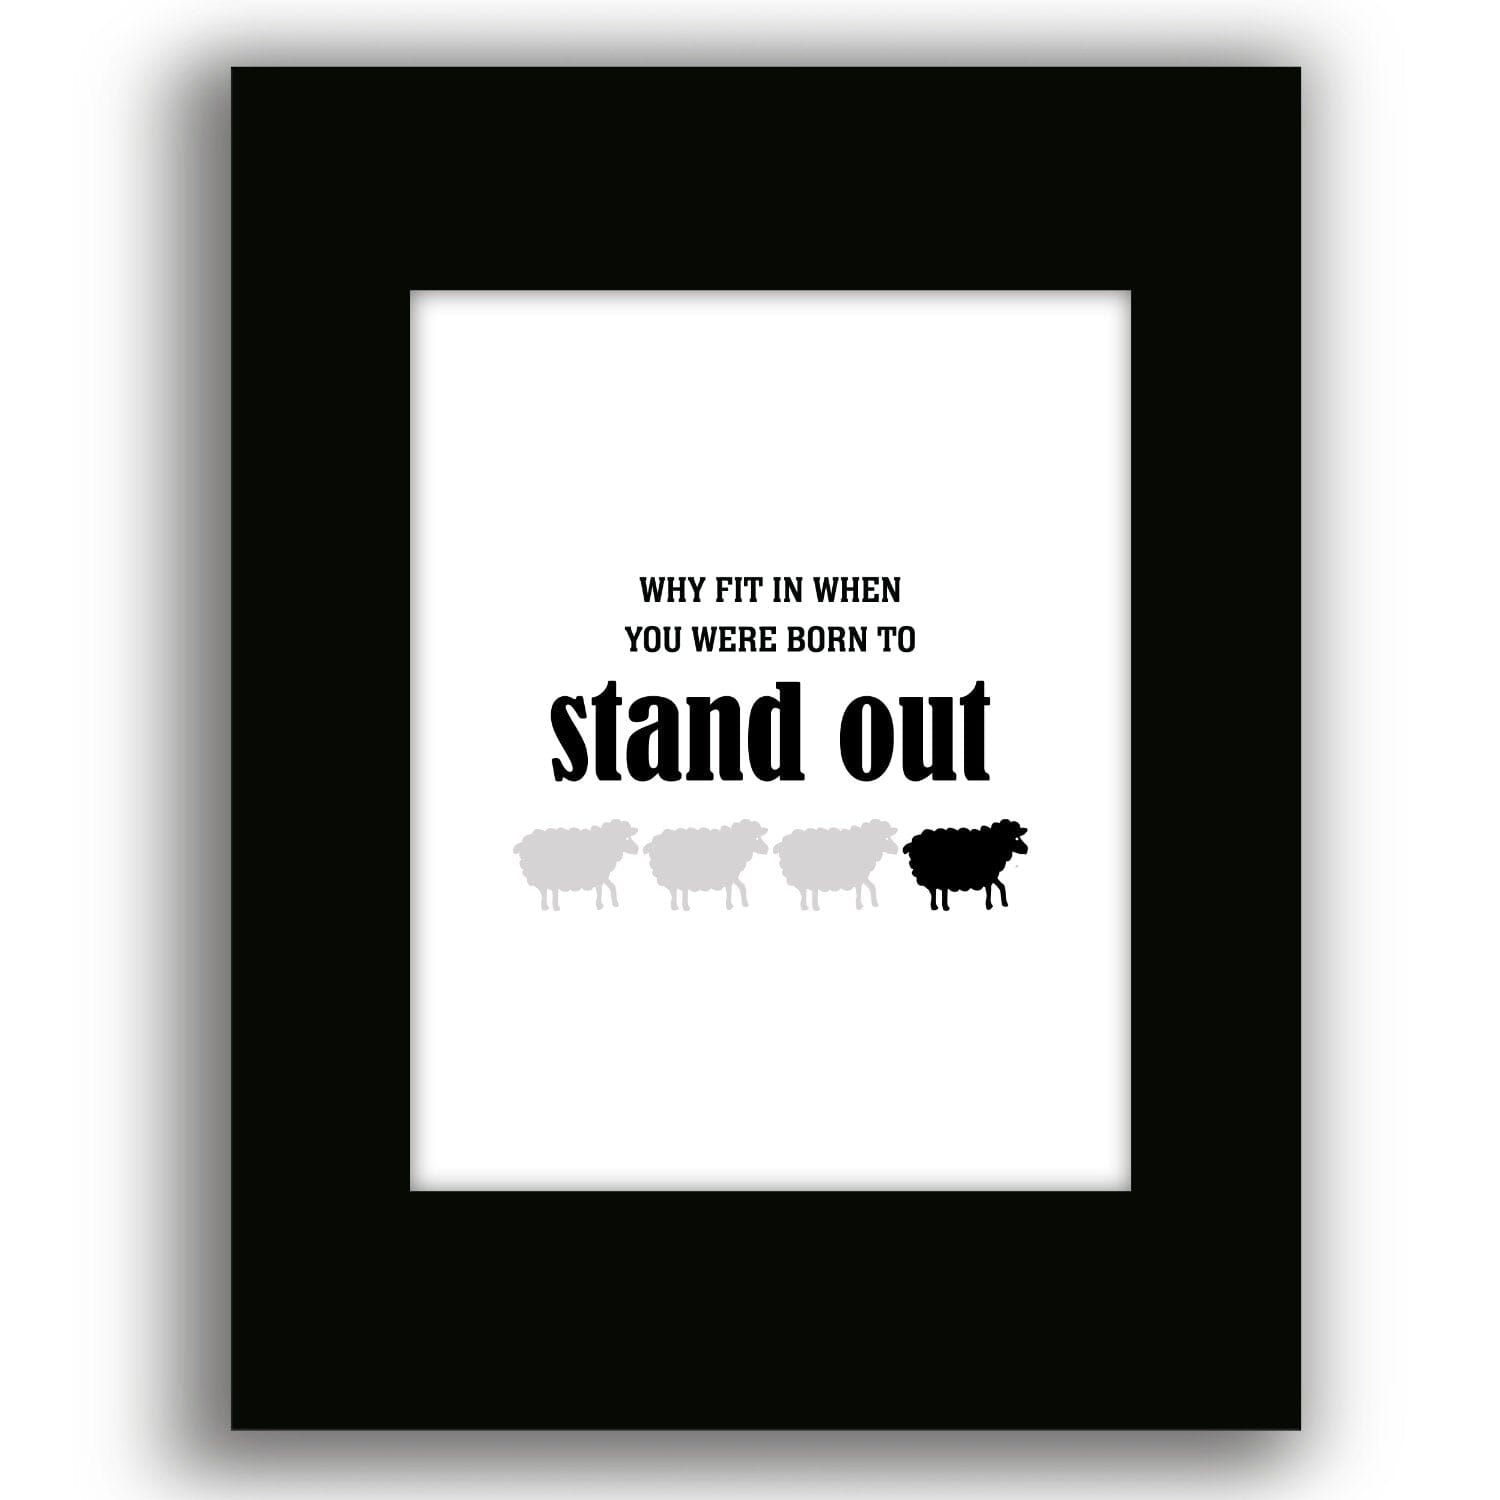 Why Fit in When You Were Born to Stand Out - Wise and Witty Print Wise and Wiseass Quotes Song Lyrics Art 8x10 Black Matted Print 